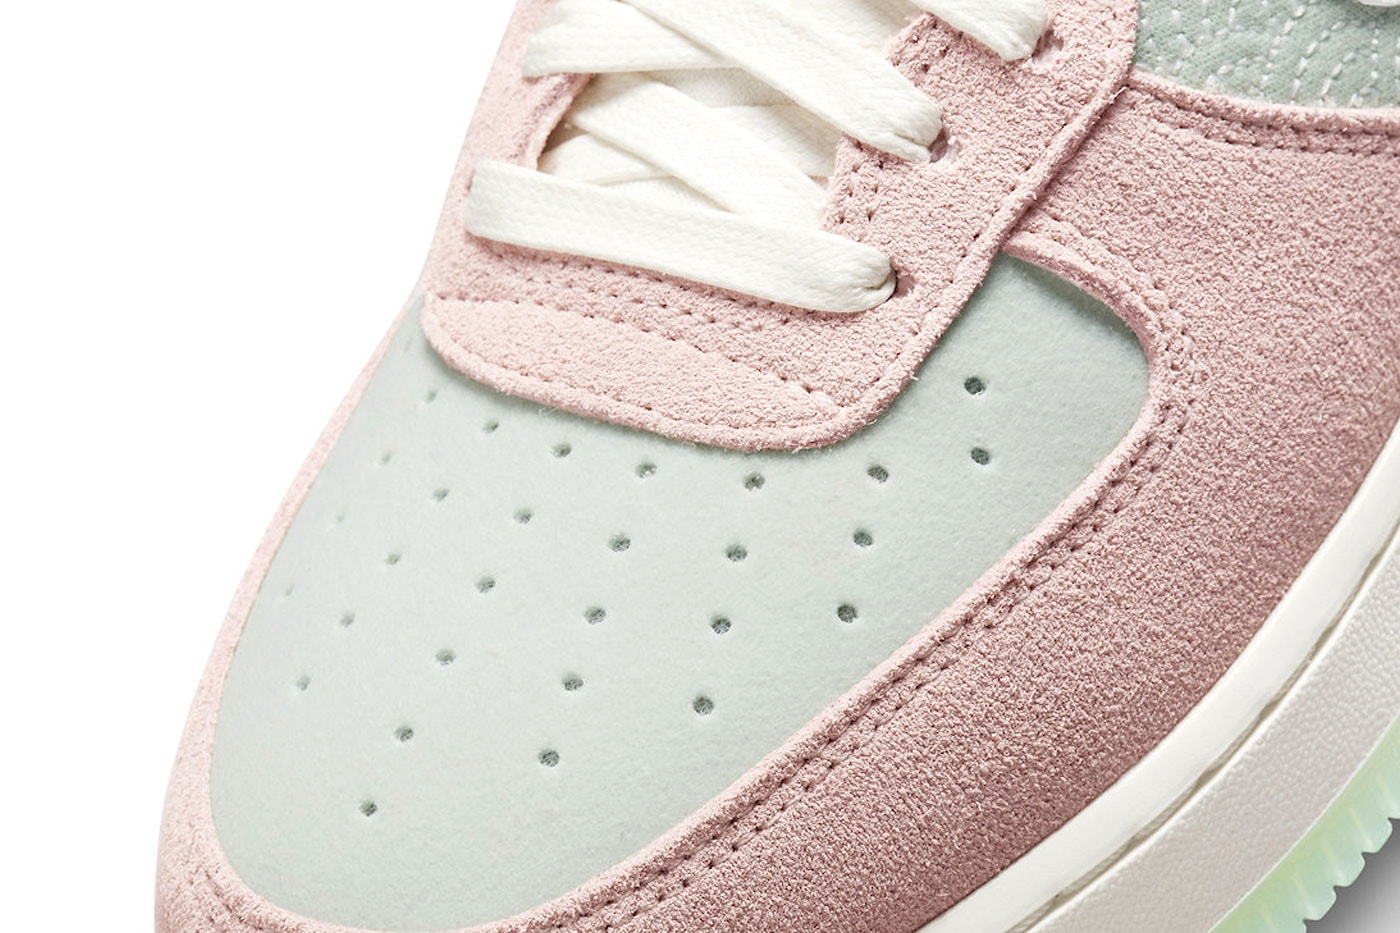 Nike Air Force 1 Low “Shapeless, Formless, Limitless” DQ5361-011 nike af1 40th anniversary pink suede green transluscent outsole 